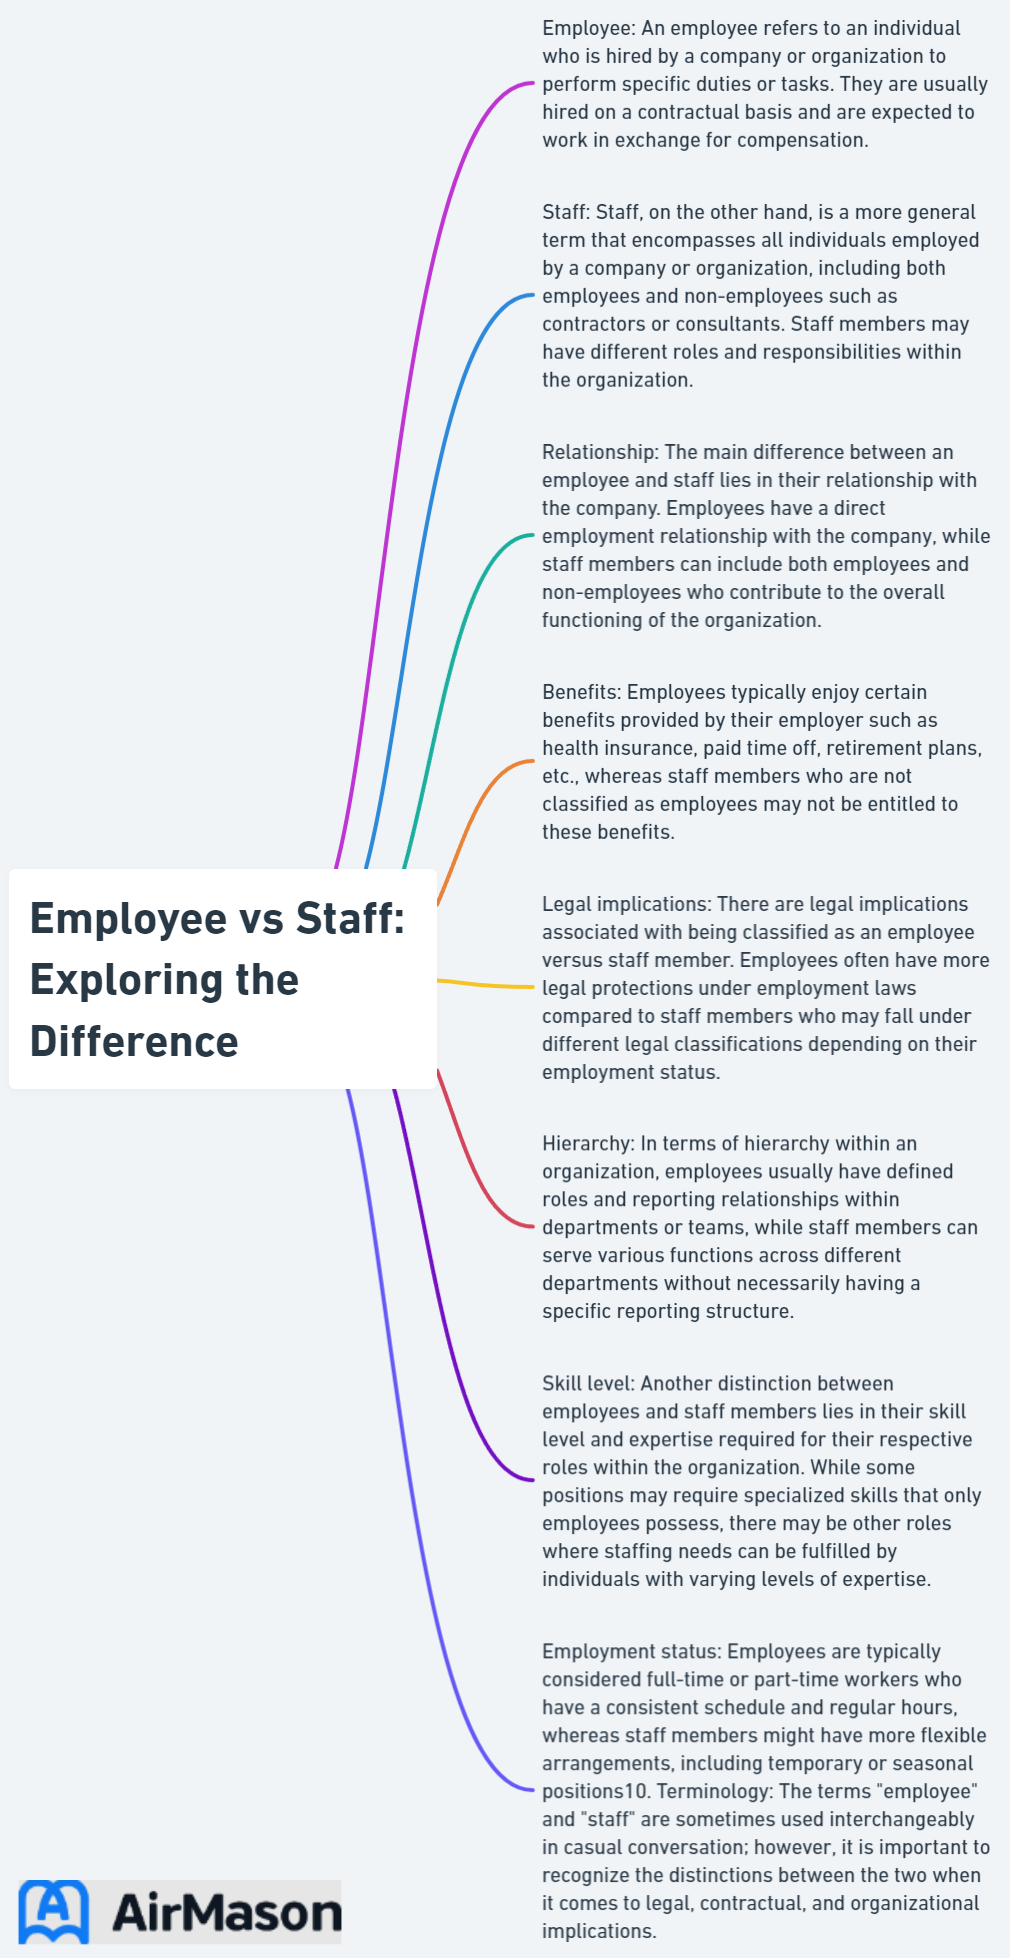 Employee vs Staff: Exploring the Difference